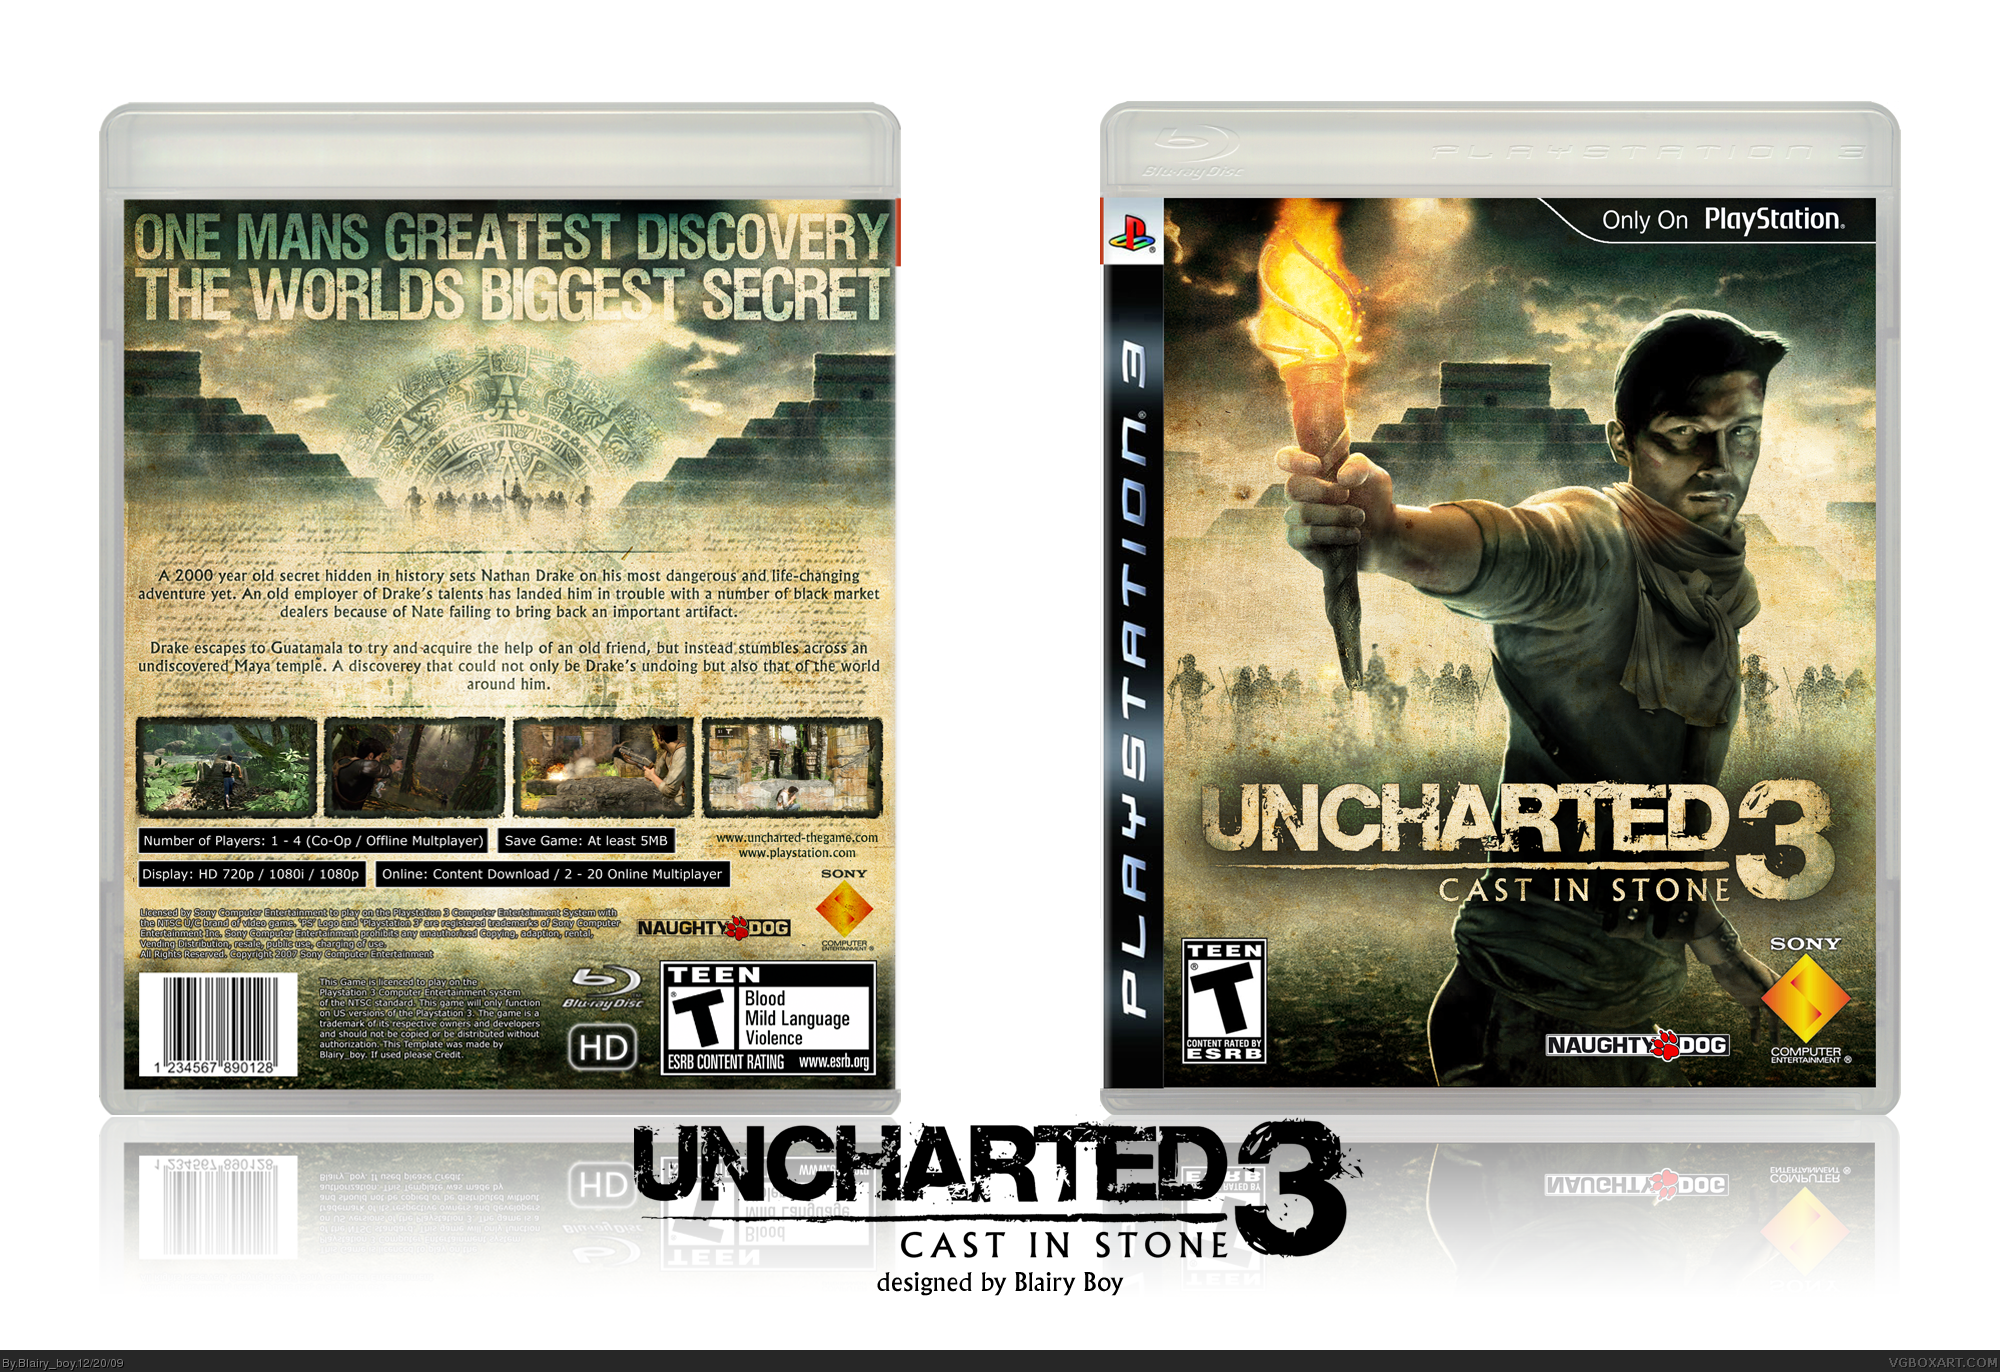 Uncharted 3: Cast In Stone box cover